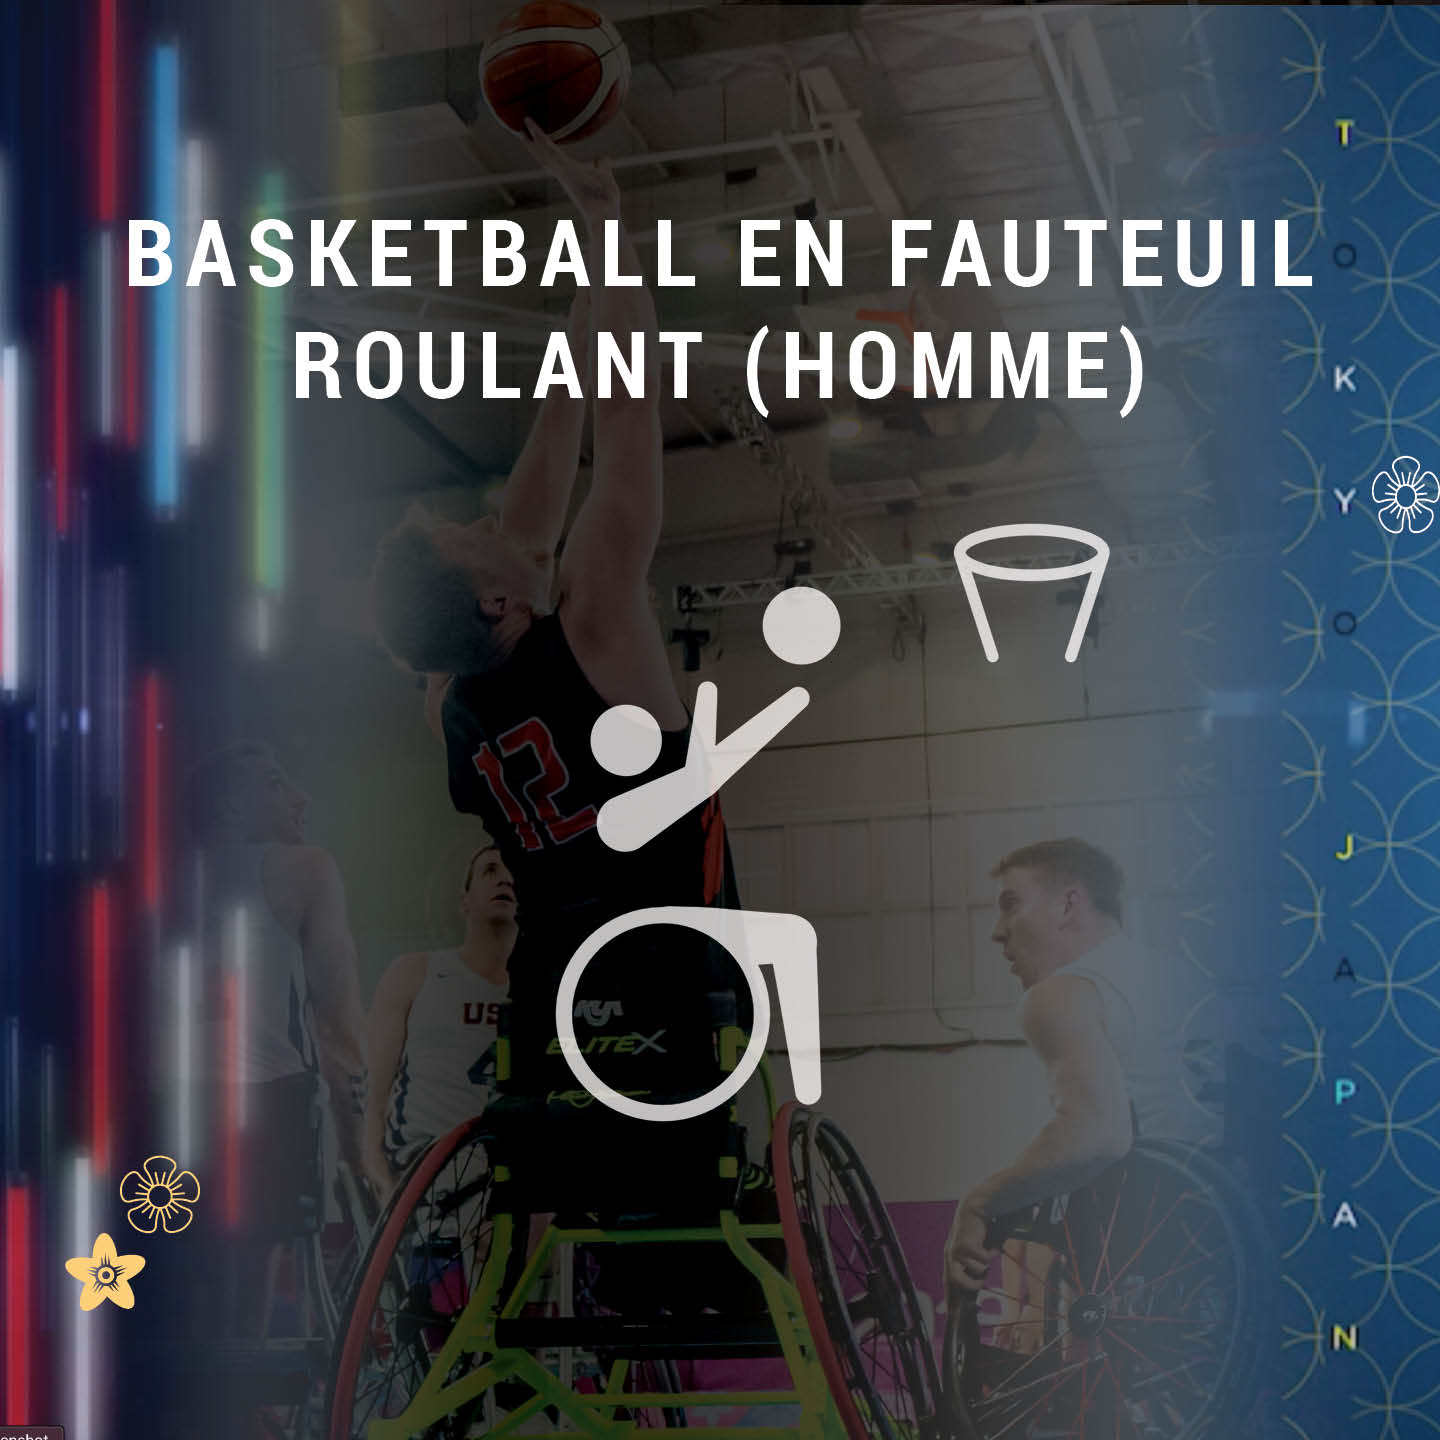 Wheelchair basketball Men Live stream and video on demand